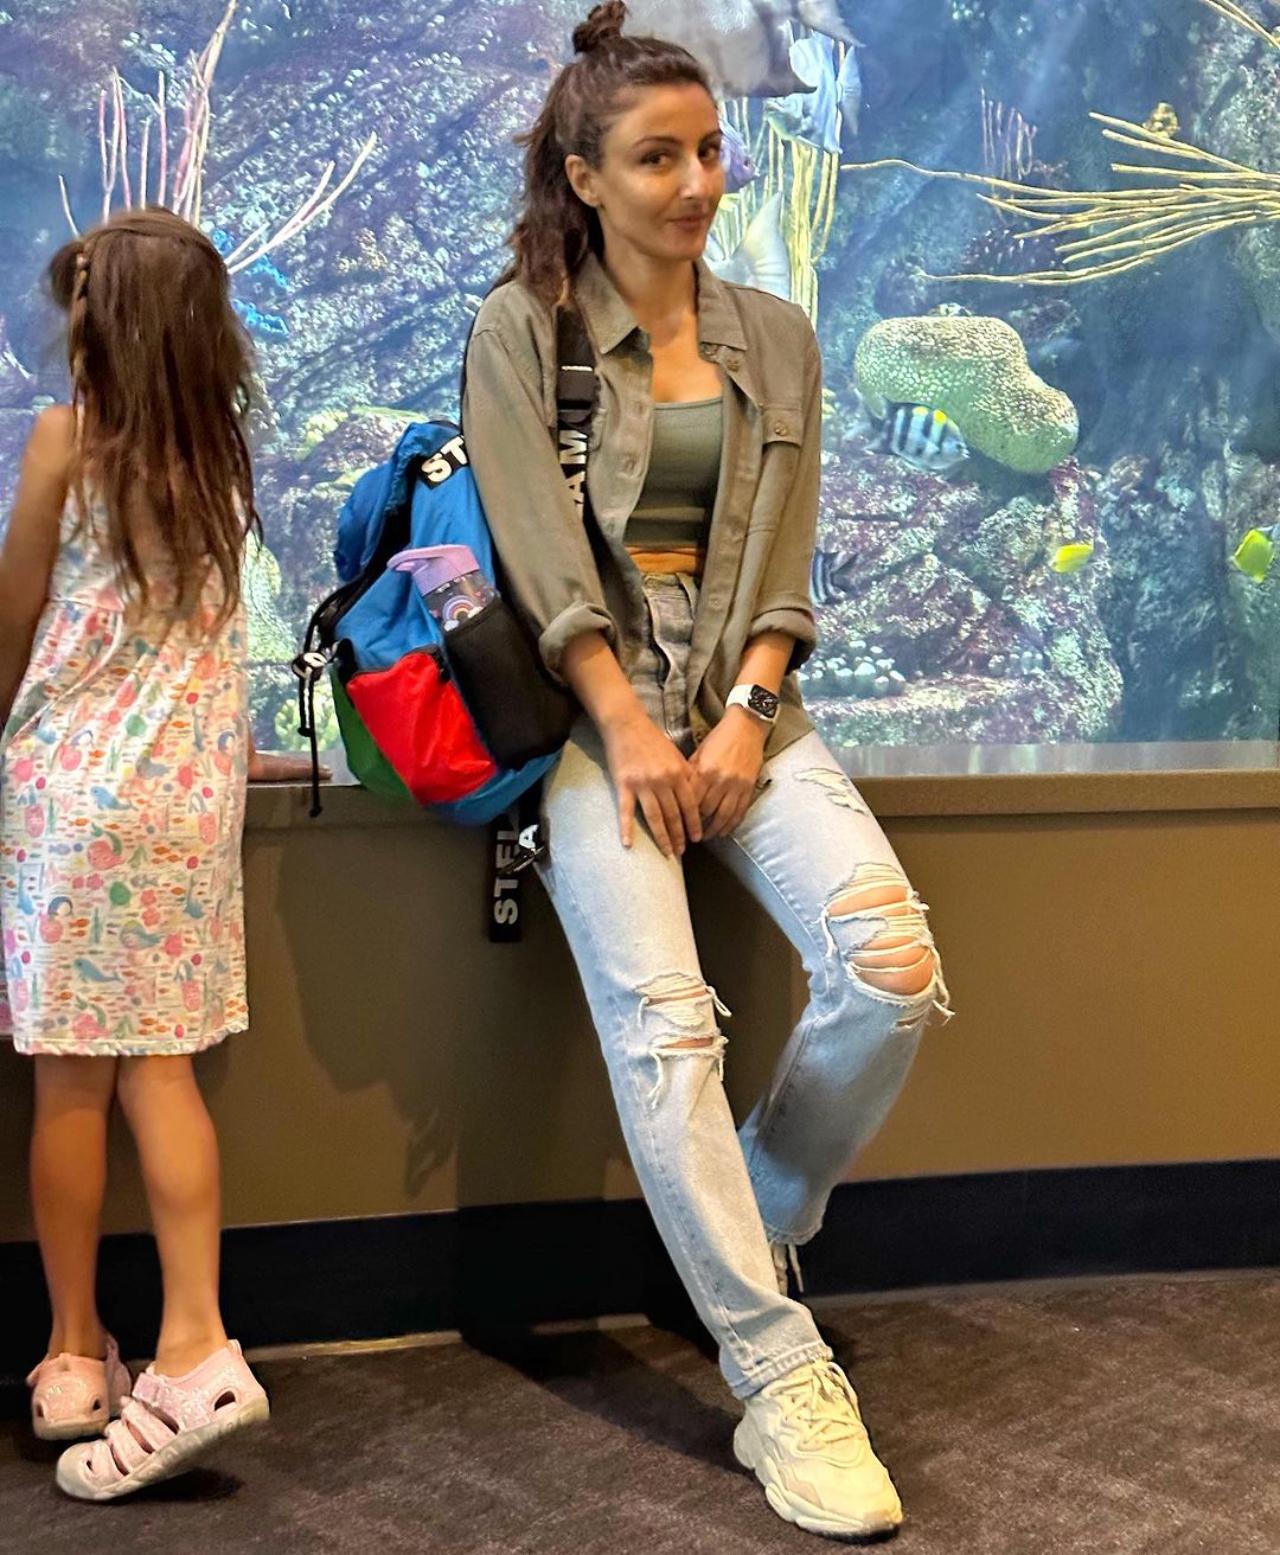 Soha is a true style icon - she looks put-together even in the simplest grey-green shirt (her rolled up sleeves add to her suave look) and ripped jeans